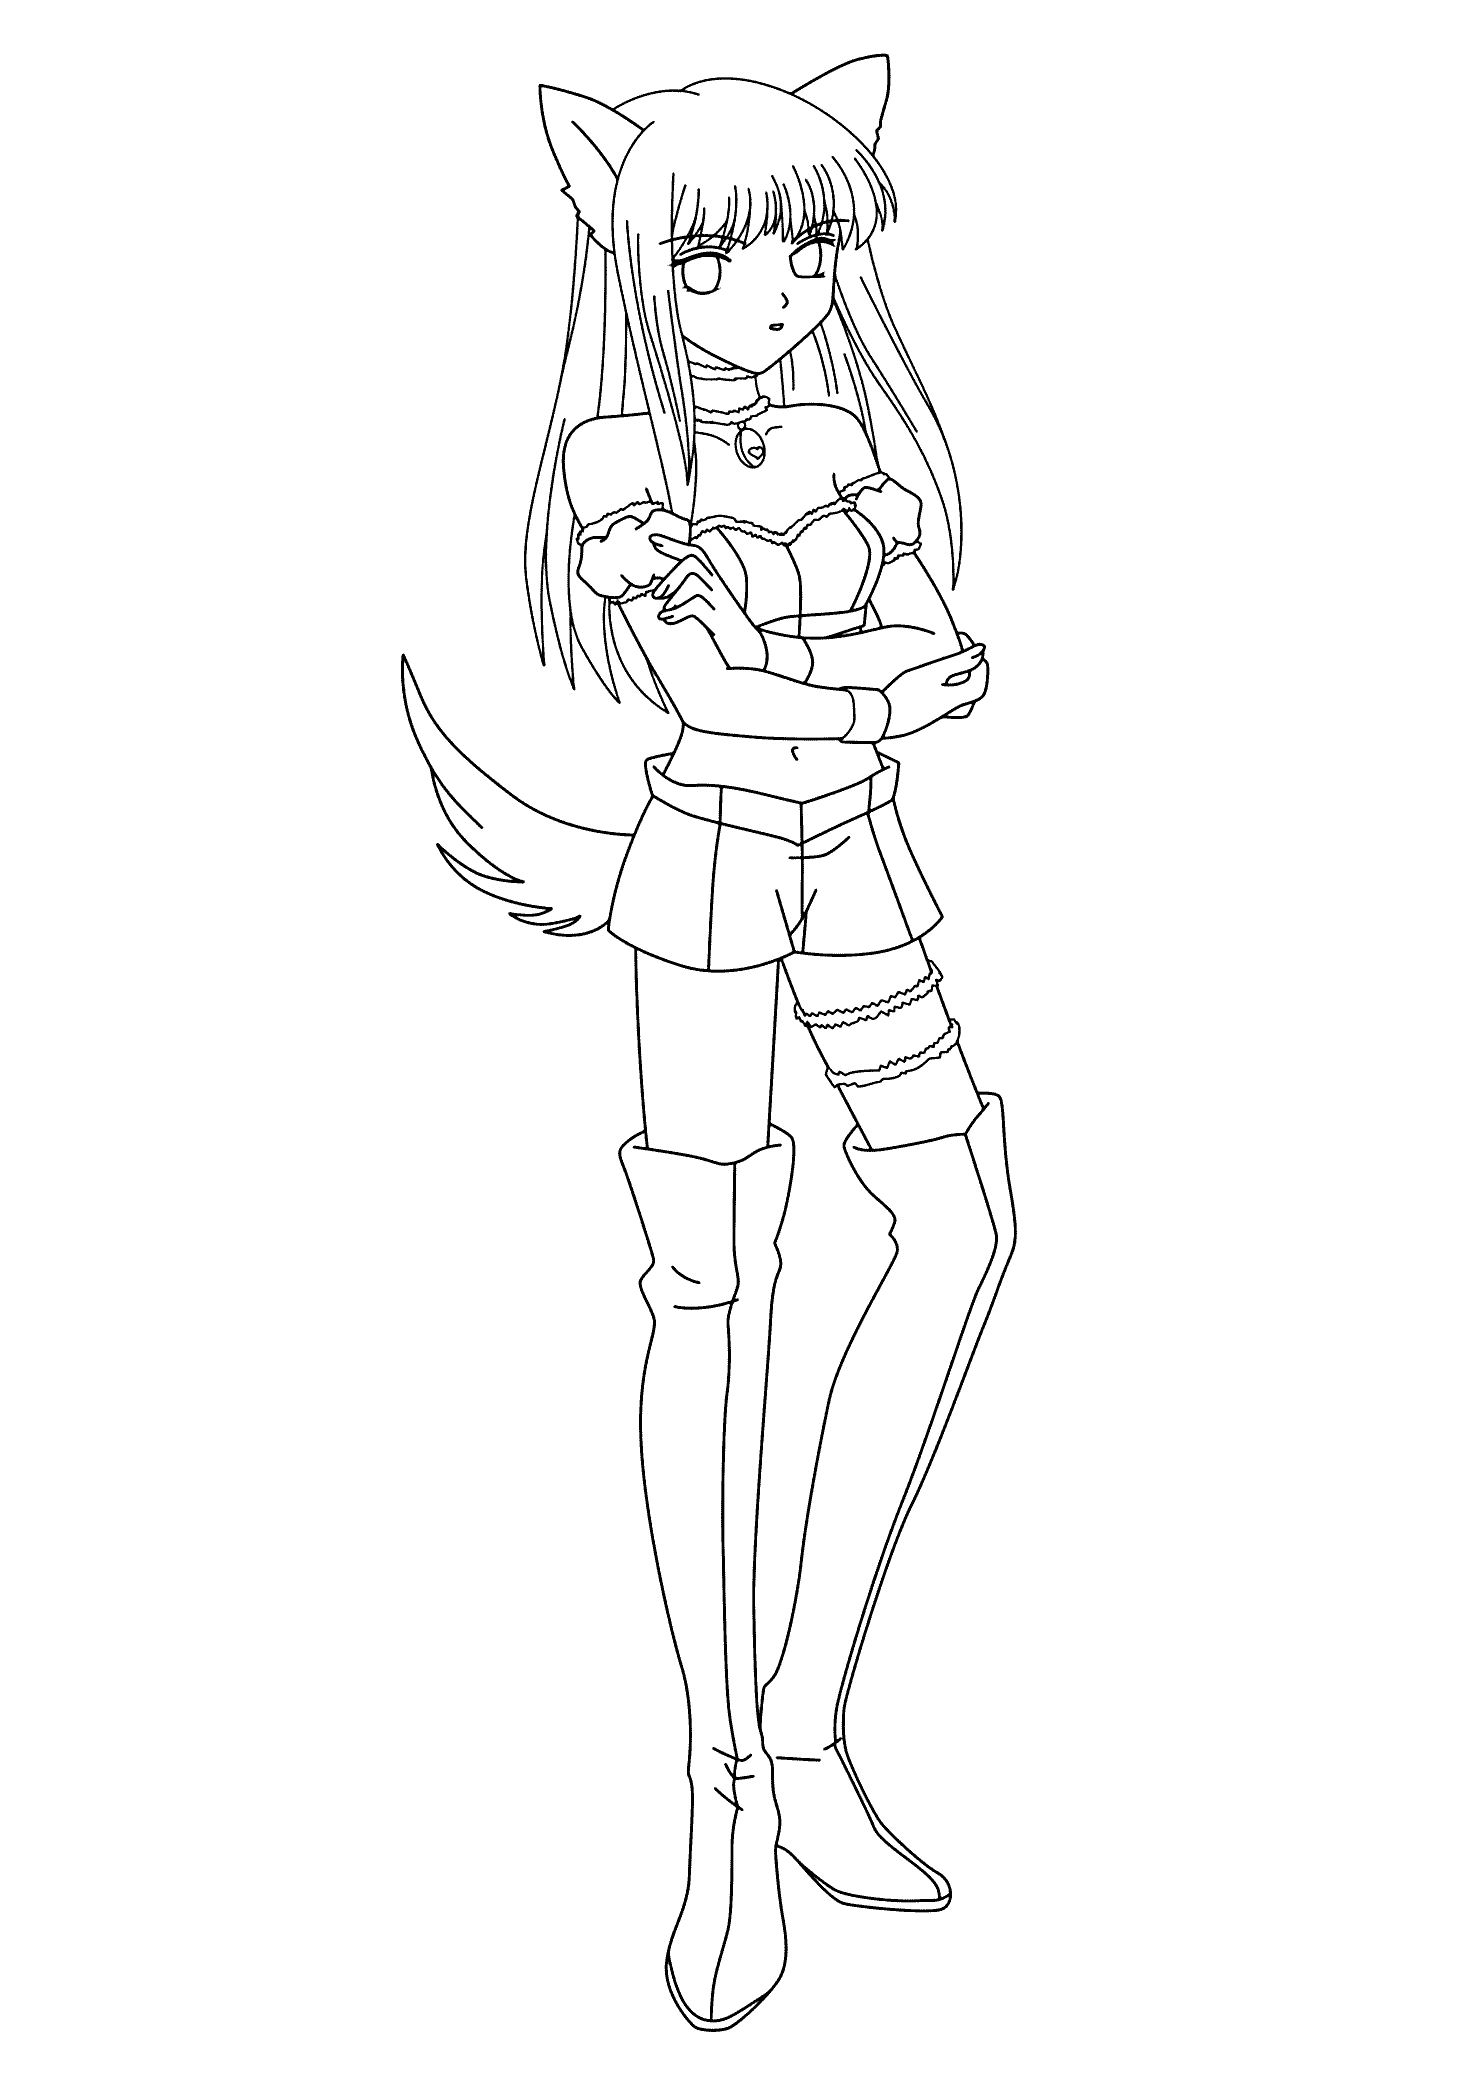 Anime Fighter Girl Coloring Pages - Ð¡oloring Pages For All Ages